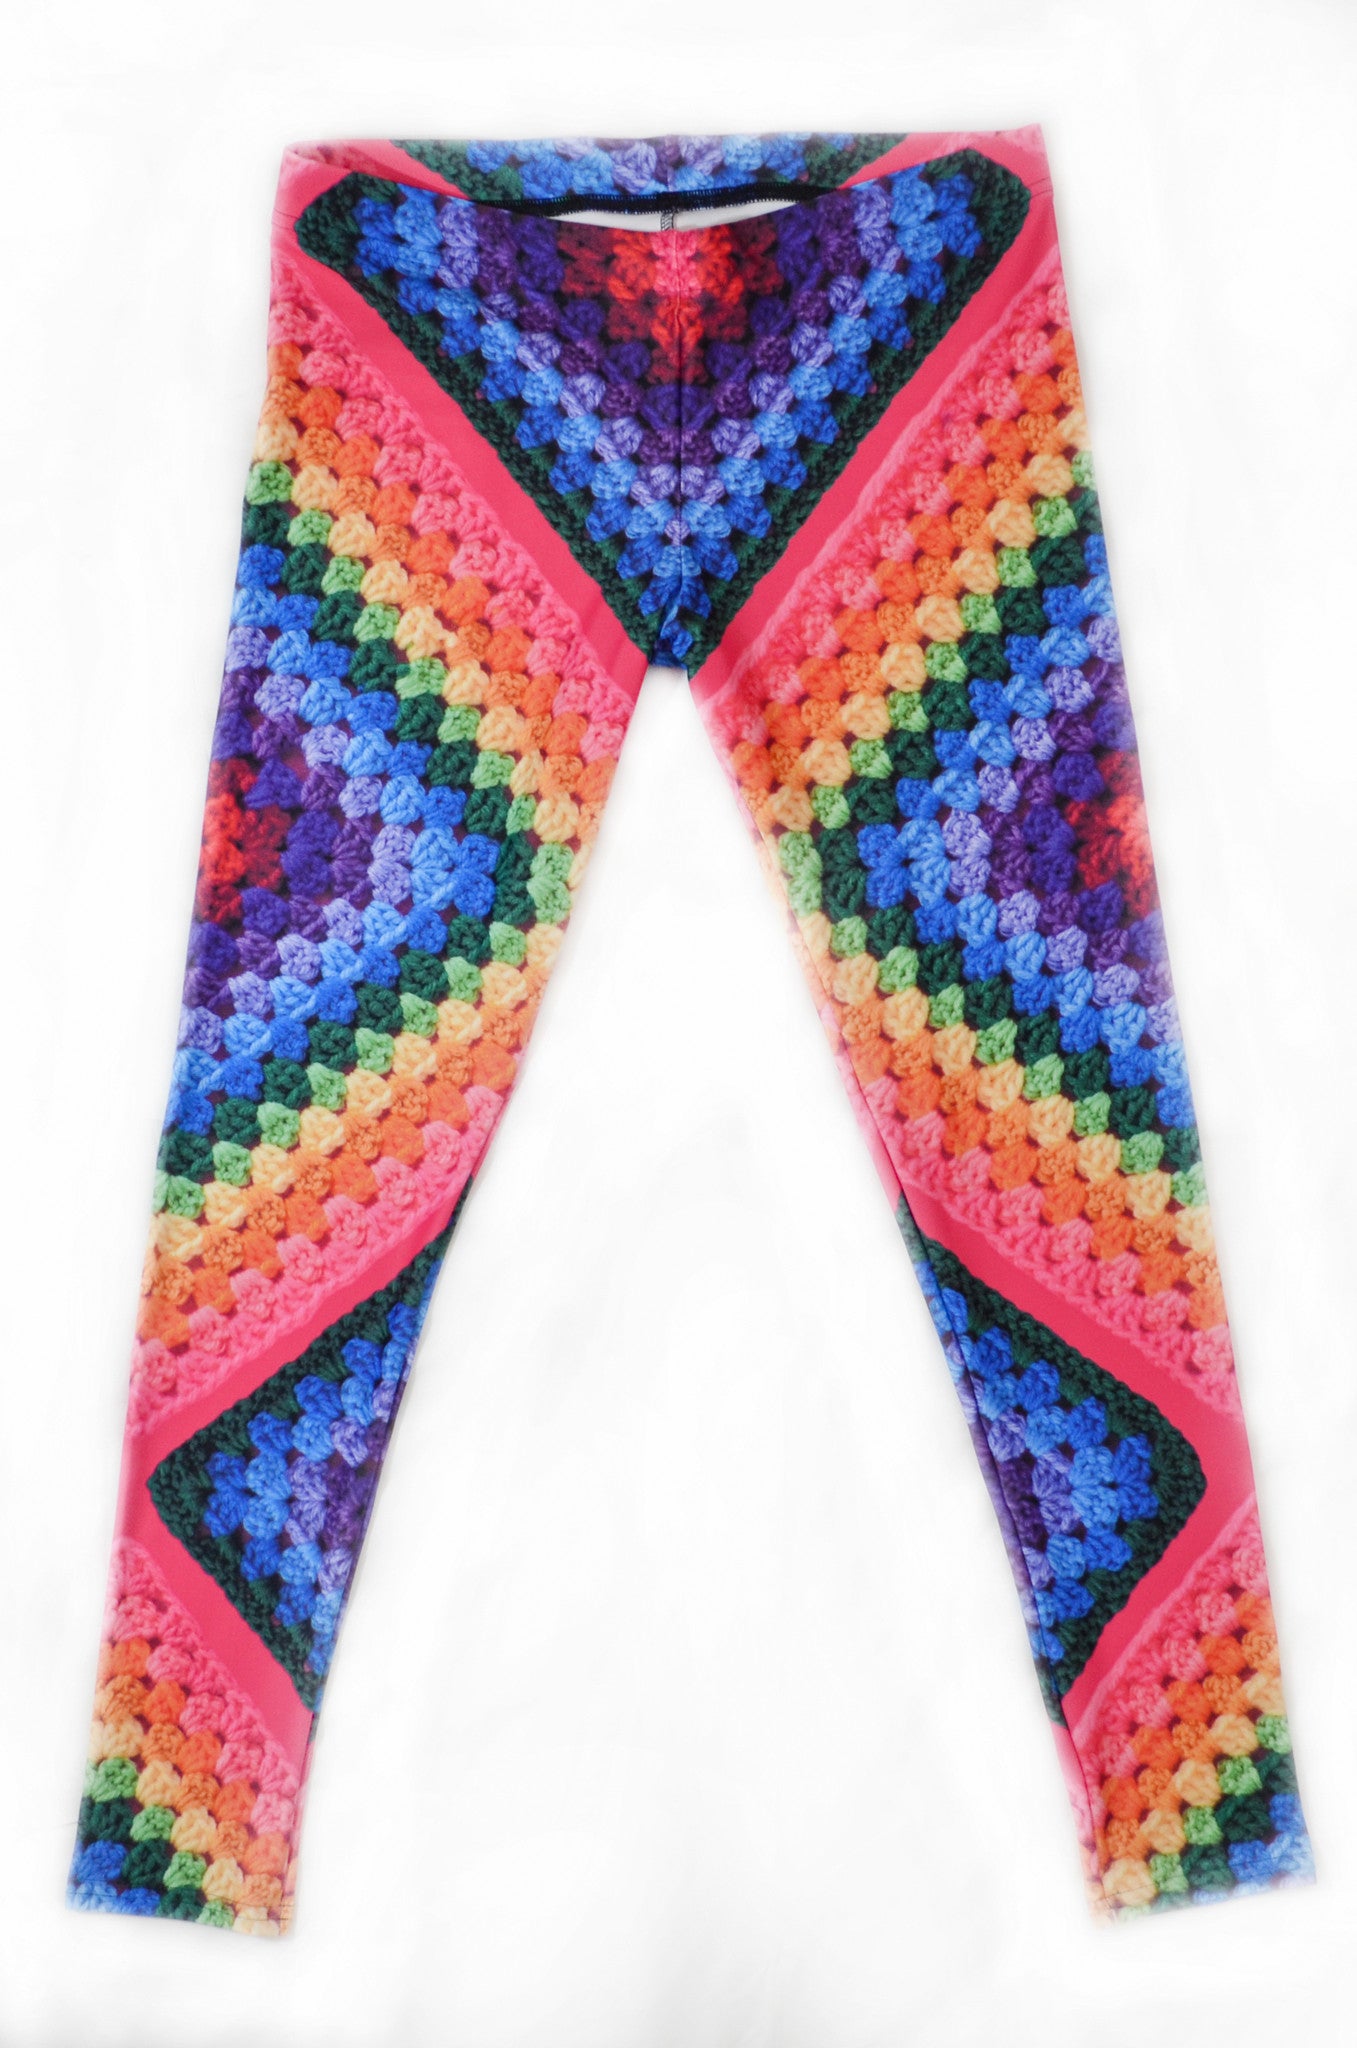 Snapdragon Brand Clothing Granny Square Crochet Print rainbow leggings in style Rainbow Soul features a tie-dye hippie boho feel and a rainbow of colors. Made of comfortable spandex.